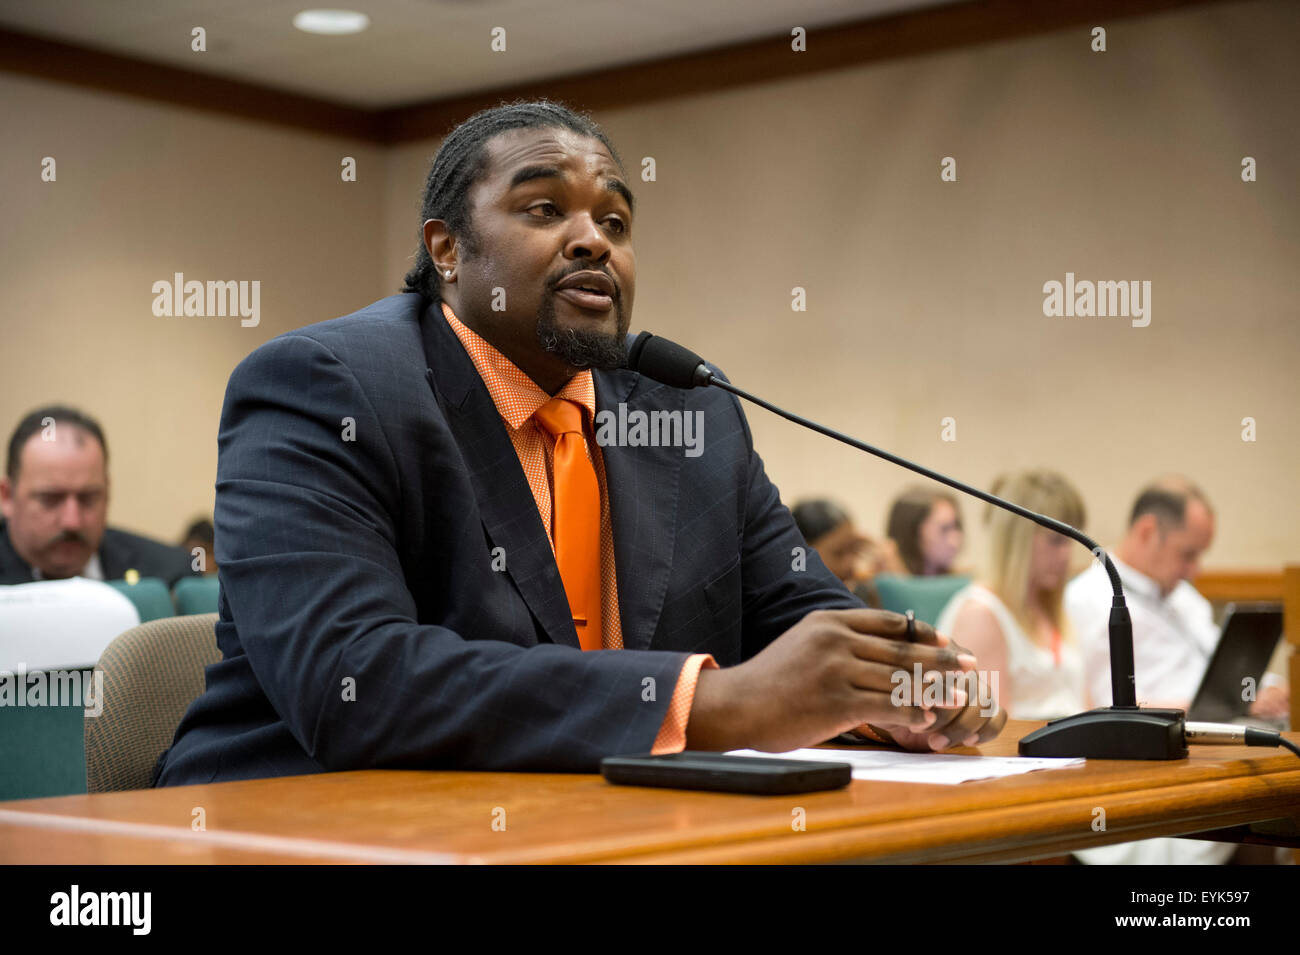 Austin, Texas USA July 30, 2015: Yannis Banks of the National Association for the Advancement of Colored People (NAACP) speaks as Texas officials continue to investigate the death of Sandra Bland, who died July 13th in the Waller County jail after a traffic stop near Houston. The hearing at the Texas Capitol drew dozens of legislators and activists wanting answers after Bland's apparent jail suicide. Credit:  Bob Daemmrich/Alamy Live News Stock Photo